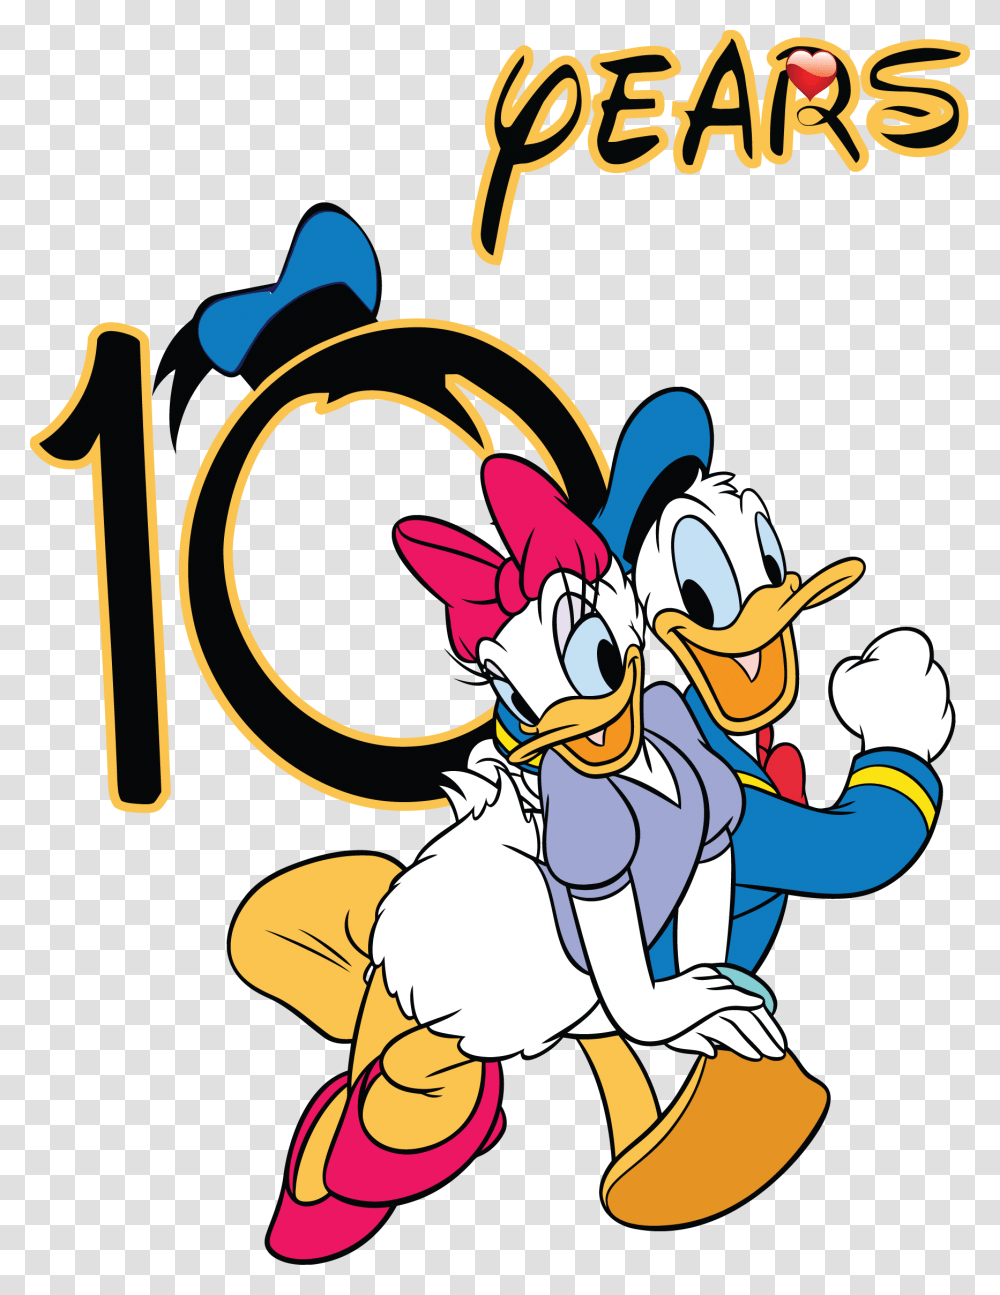 Anniversary Disney Shirts Donald And Daisy Couples, Crowd, Outdoors Transparent Png